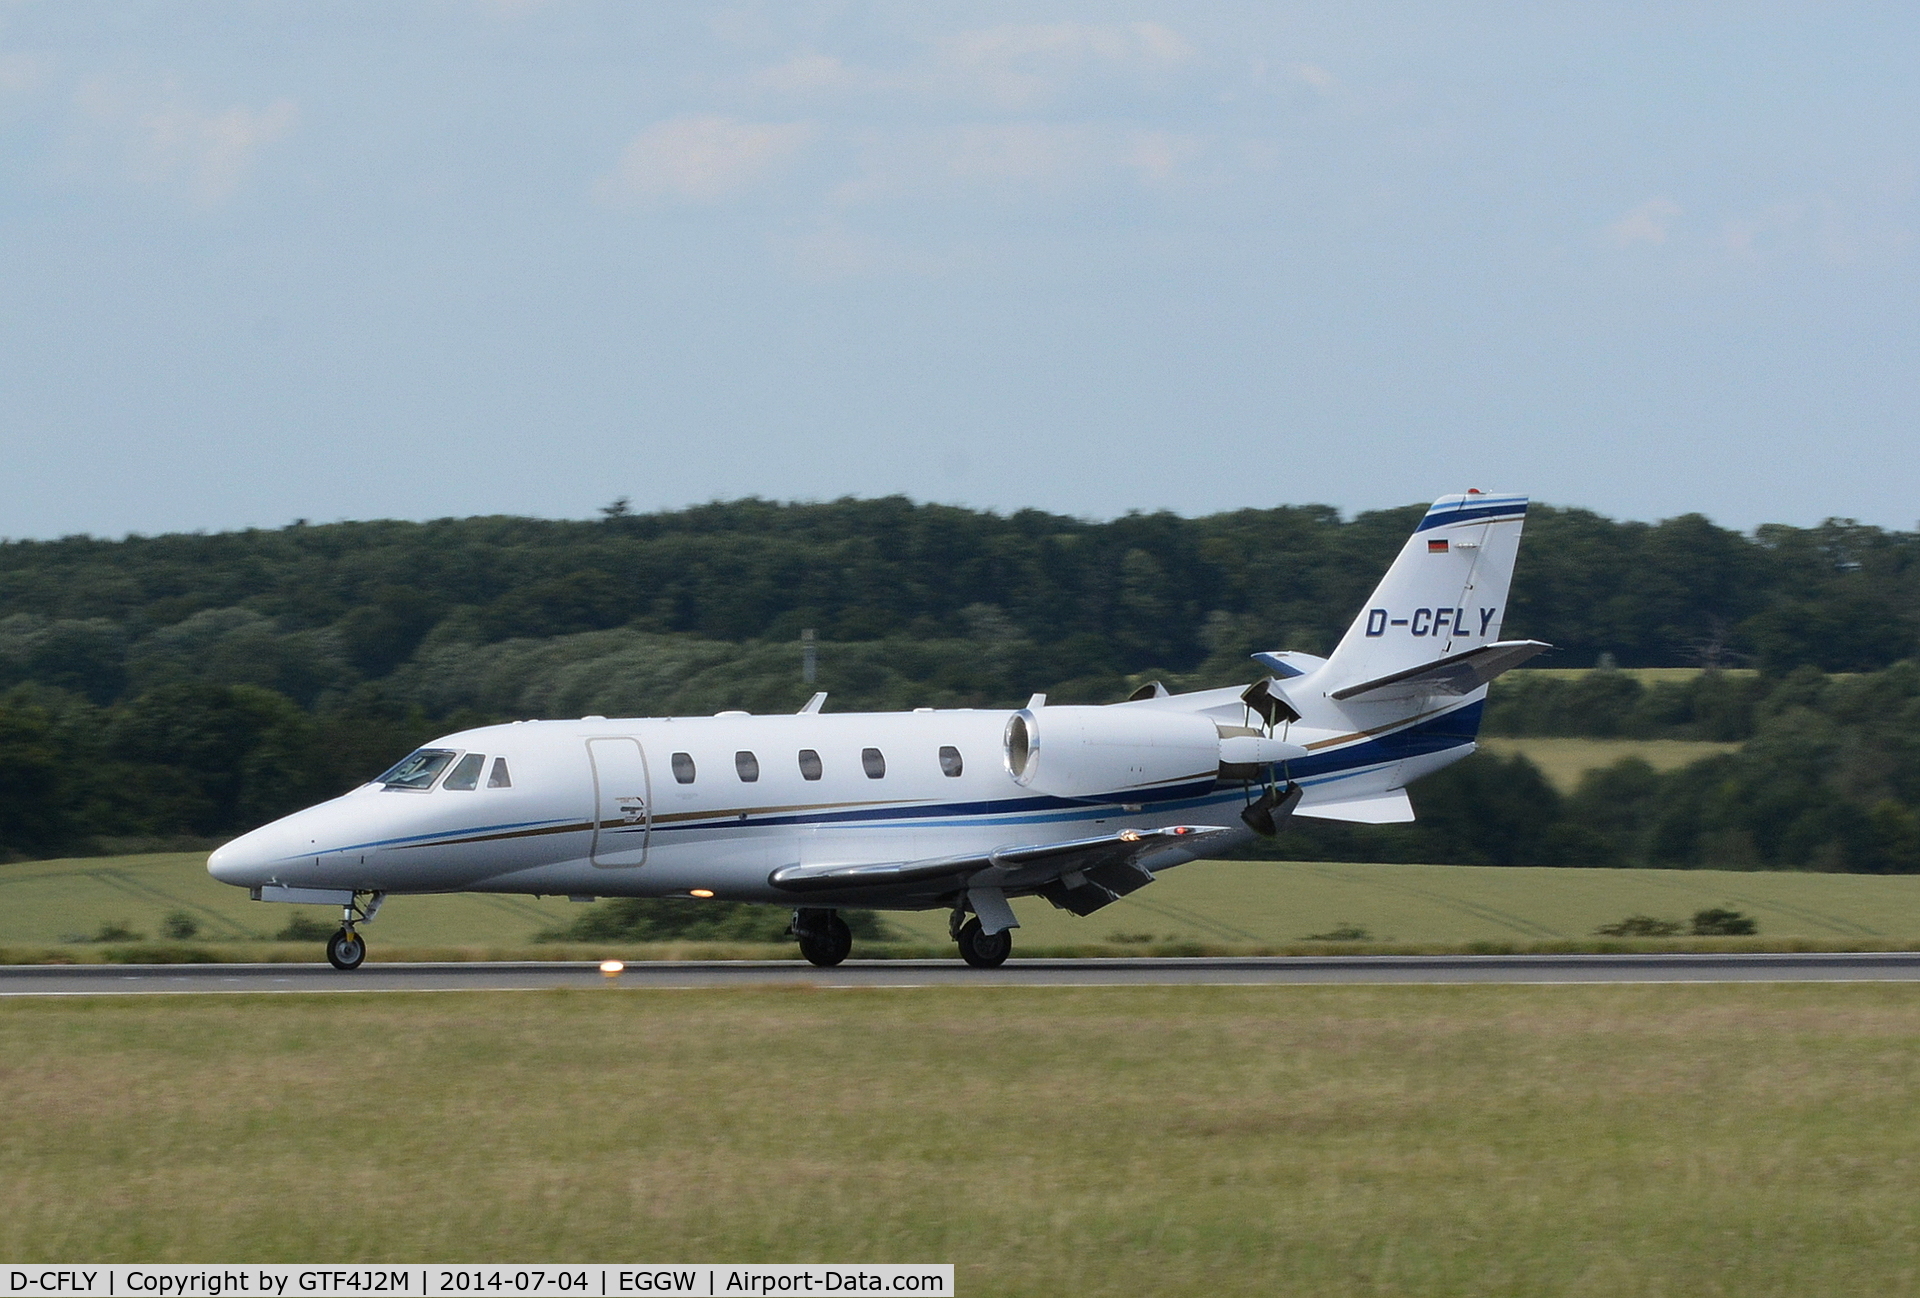 D-CFLY, 2009 Cessna 560 Citation XLS+ C/N 560-6014, D-CFLY(2)  arrived at Luton